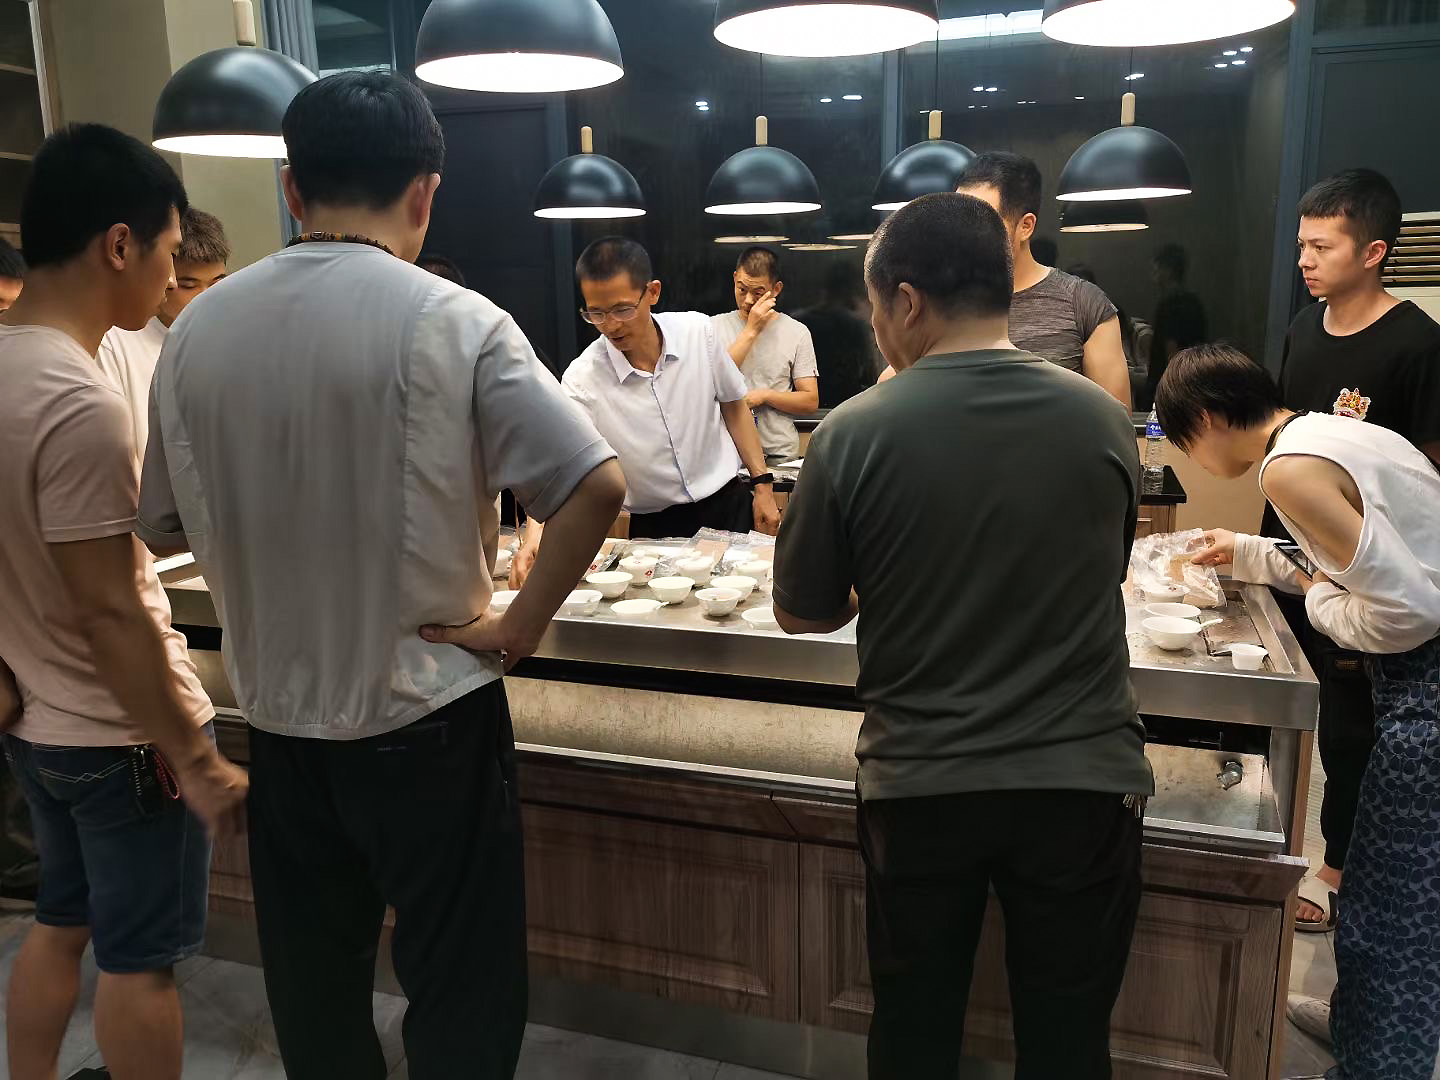 Several people gathered around a tea table covered in dozens of gaiwan.